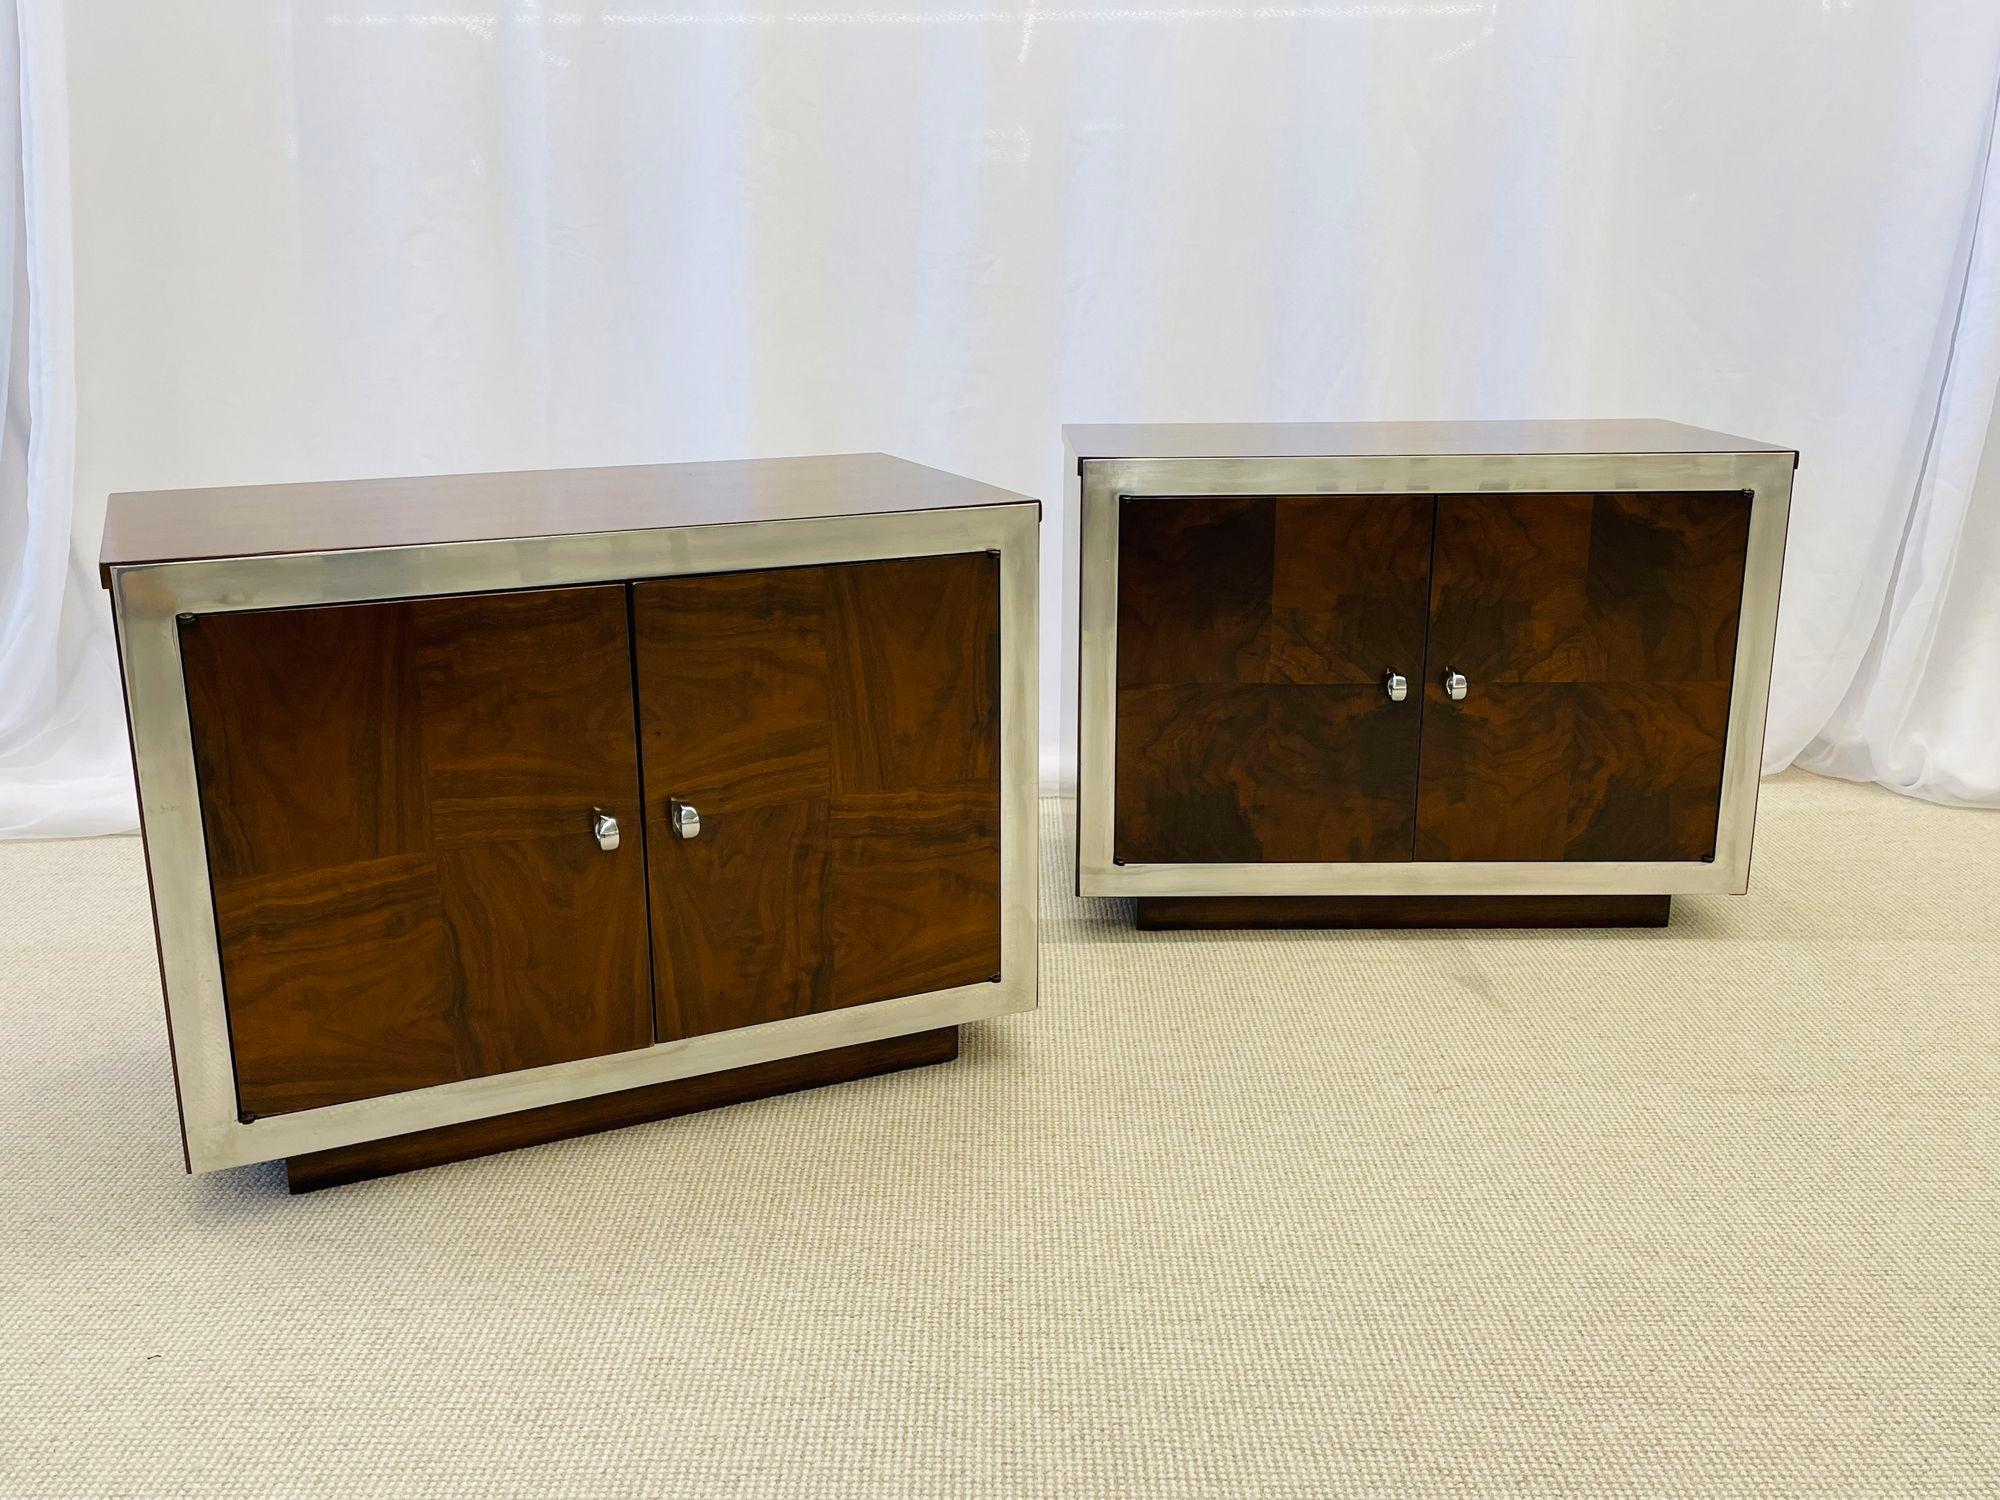 Pair of American Mid-Century Modern Milo Baughman style nightstands, Burlwood, Chrome
Set of low profile nightstands having two doors that swing open and original chrome hardware/accents, attributed to Milo Baughman. The fine rosewood style veneer